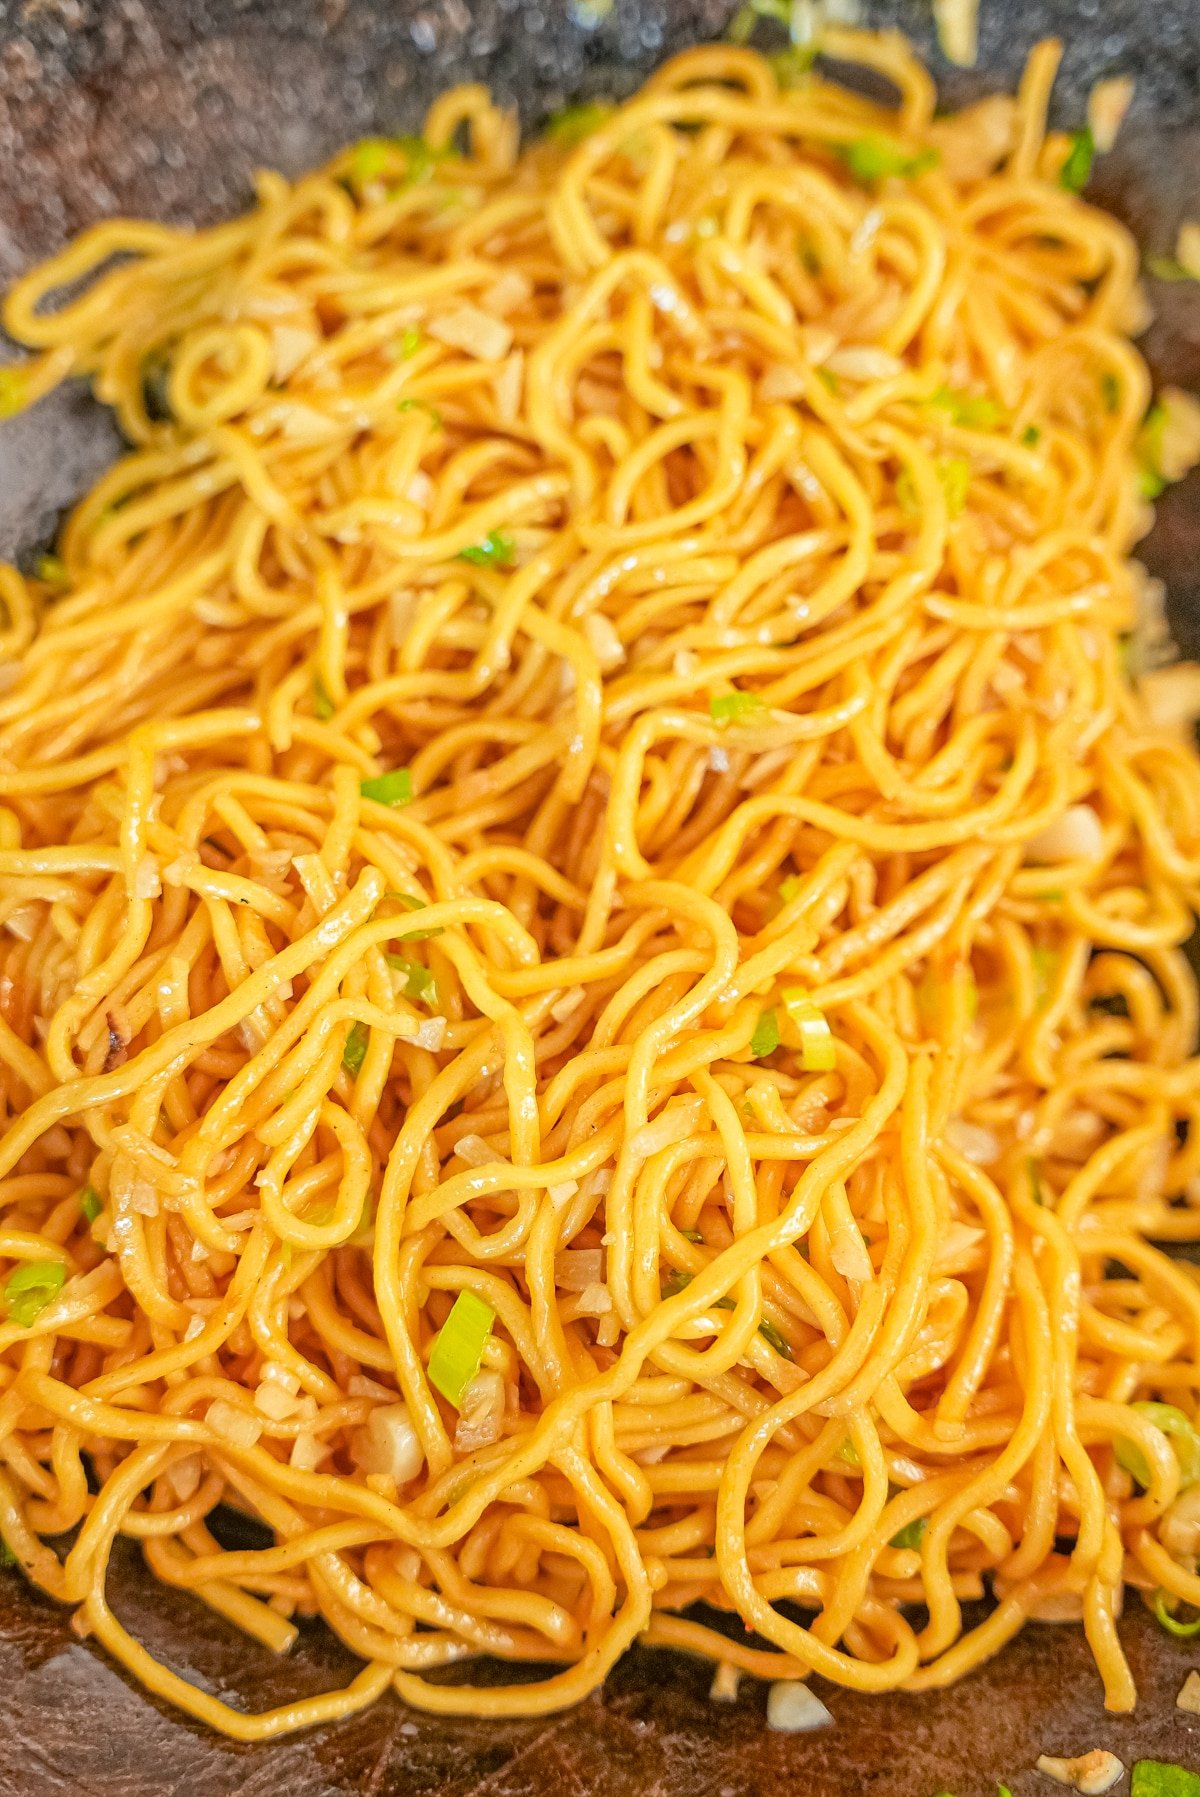 Garlic noodles tossed in a wok.